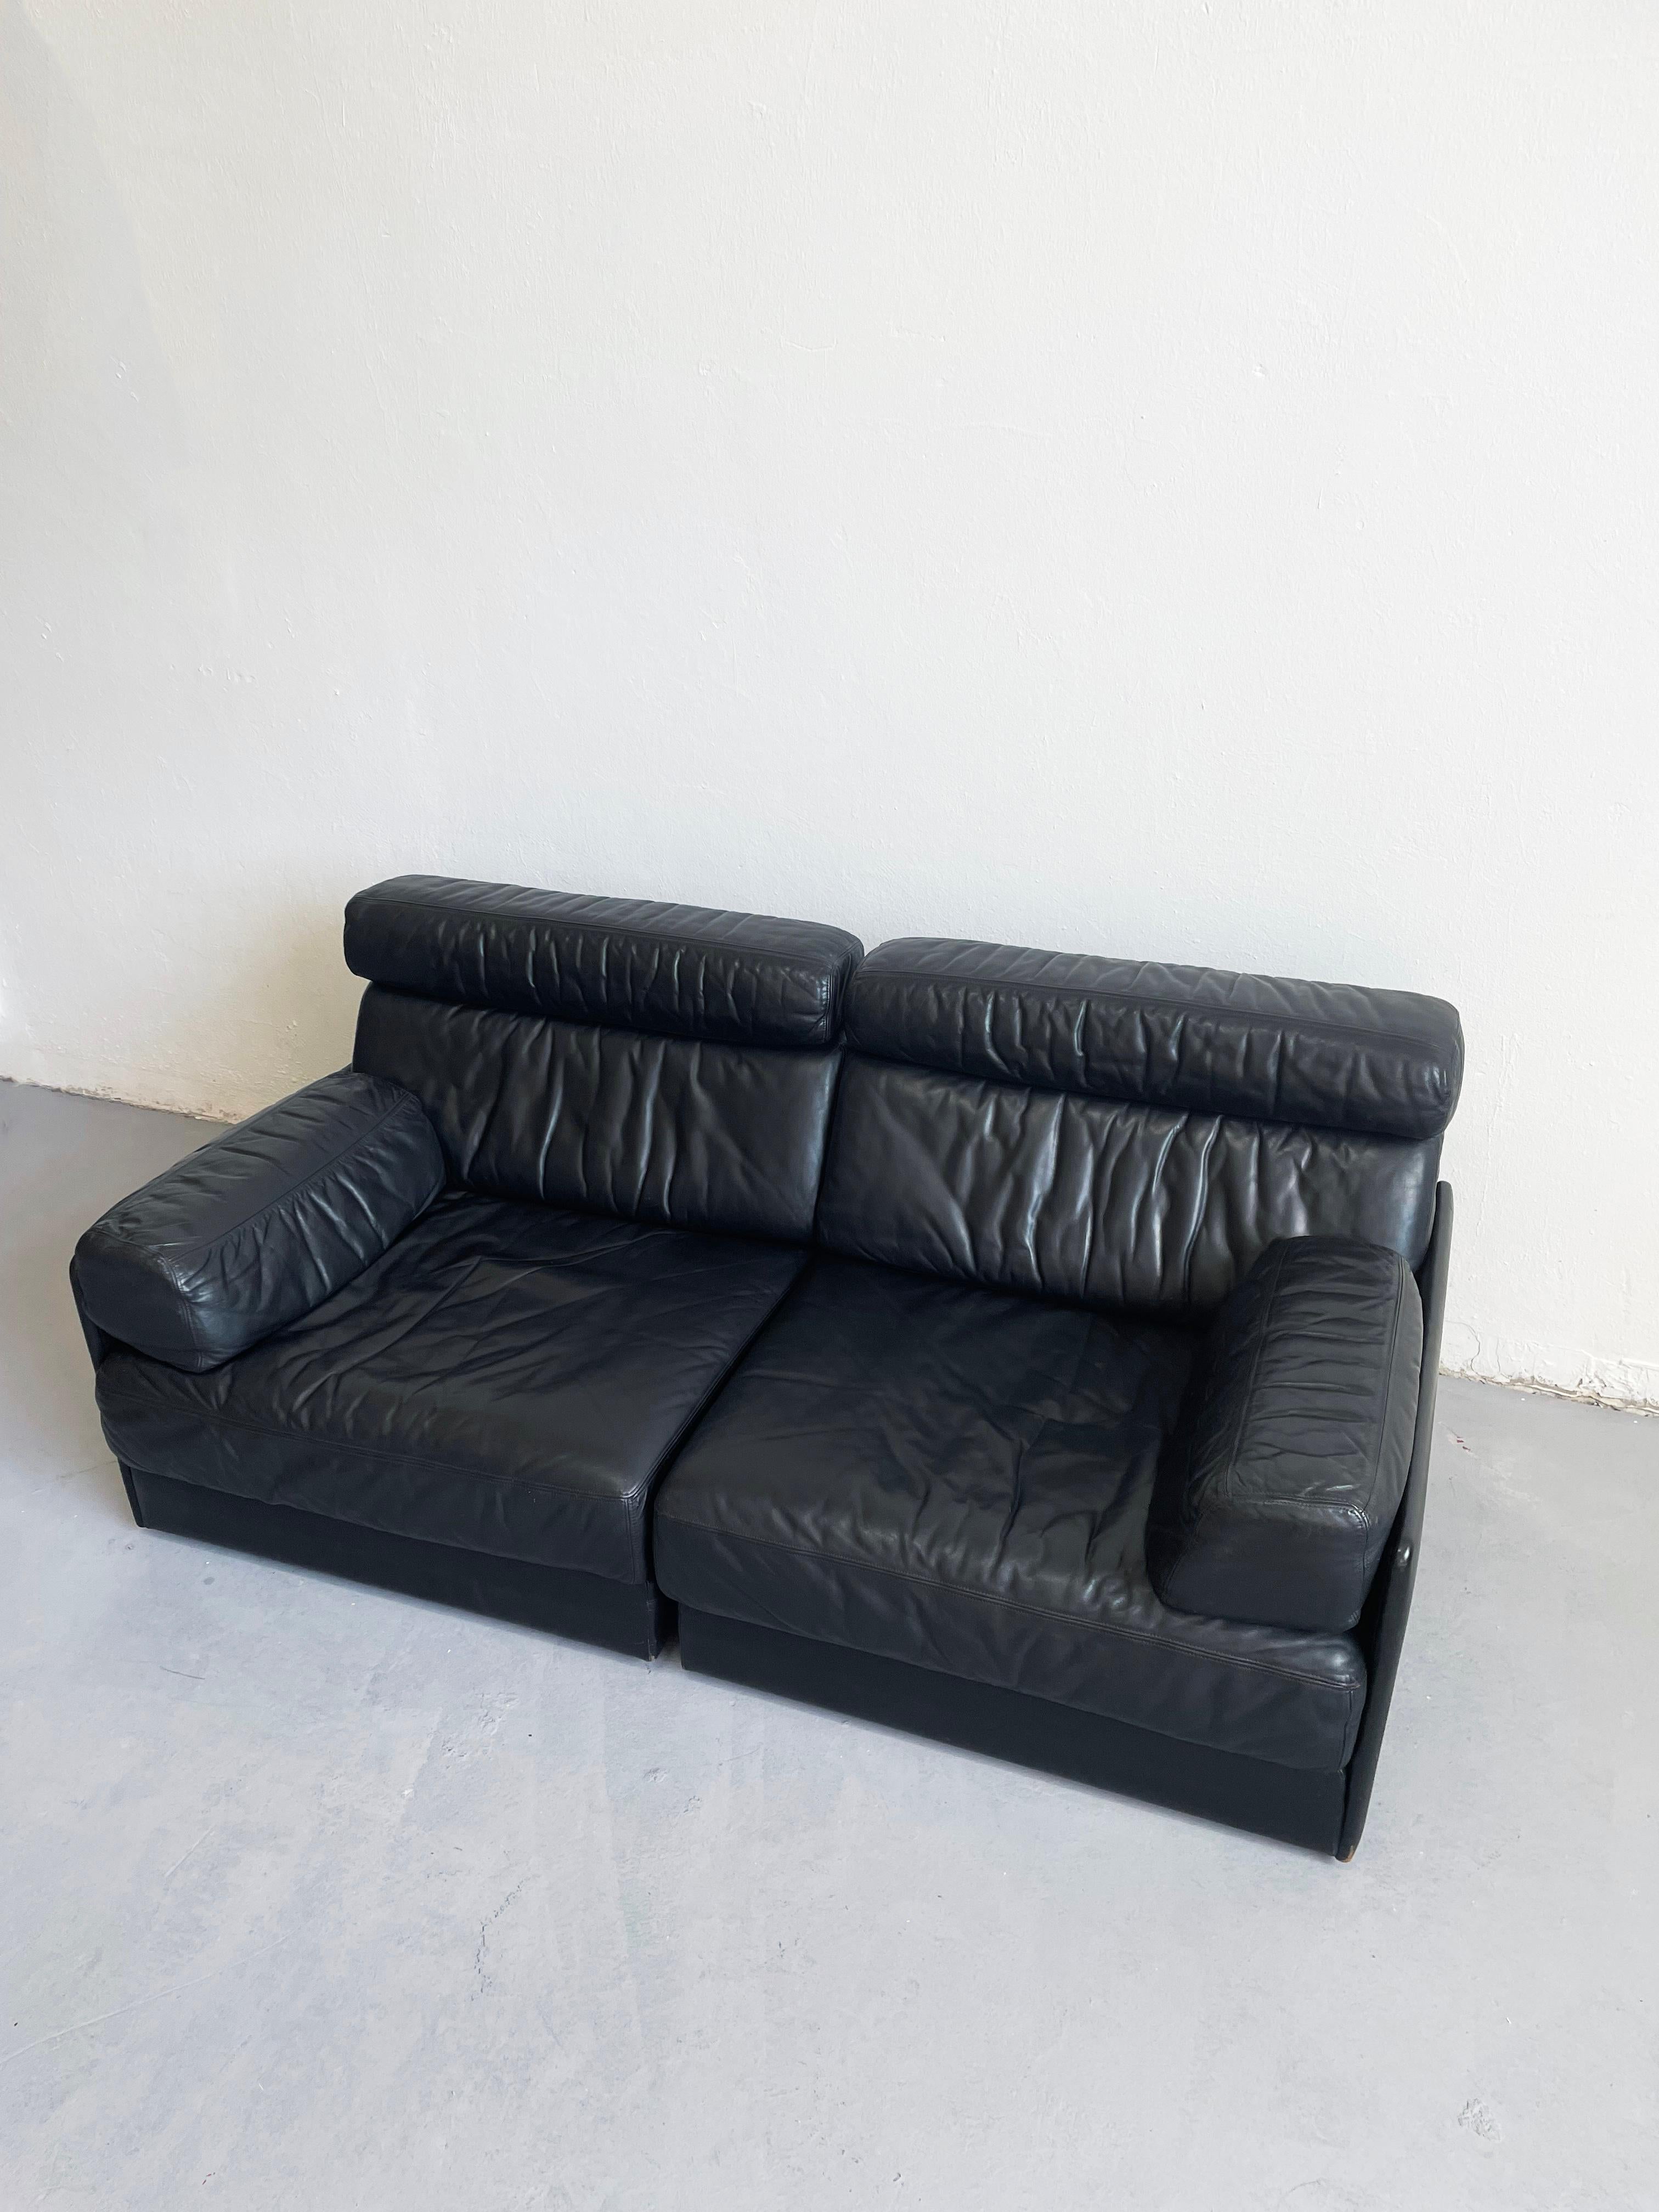 Vintage De Sede Modular Two Seater 'DS-77' Sofa Bed in Black Leather 2